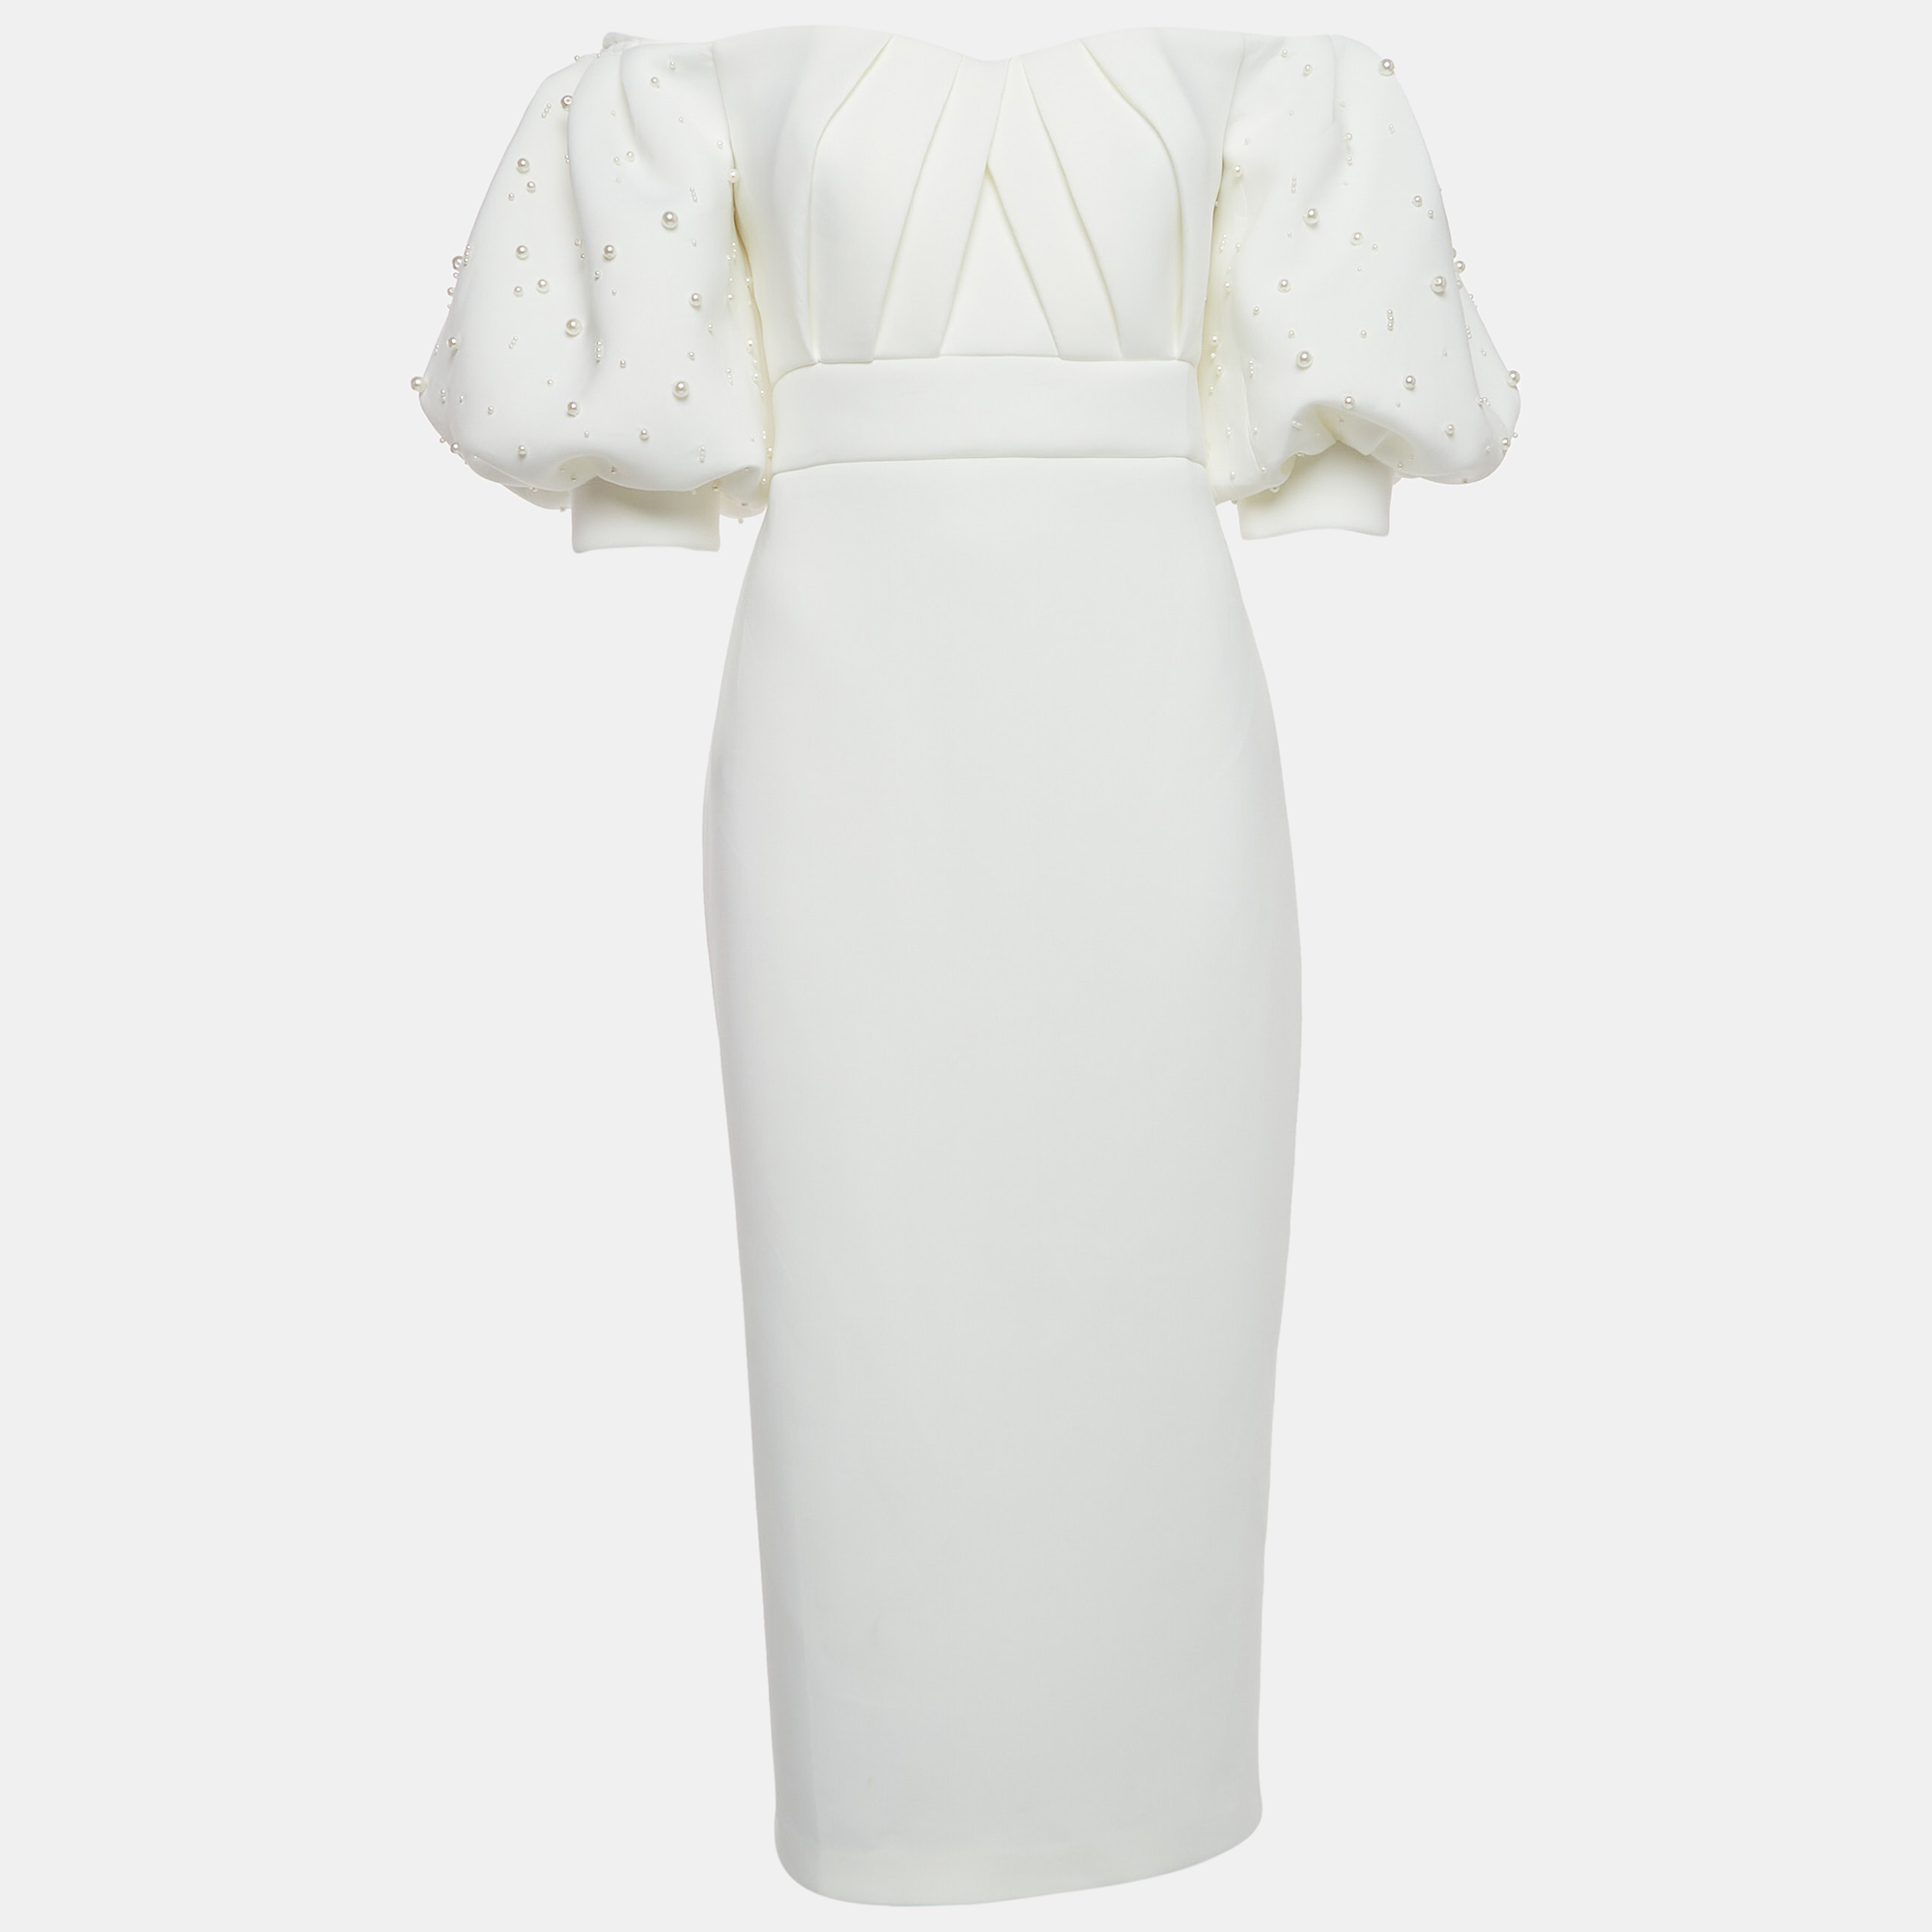 This stylish ivory dress with pearl embellishment exudes elegance and sophistication. Its flattering midi length offers a versatile option for various occasions. Delicate and exquisitely feminine the dress is perfect for evenings dates and even a bridal party.